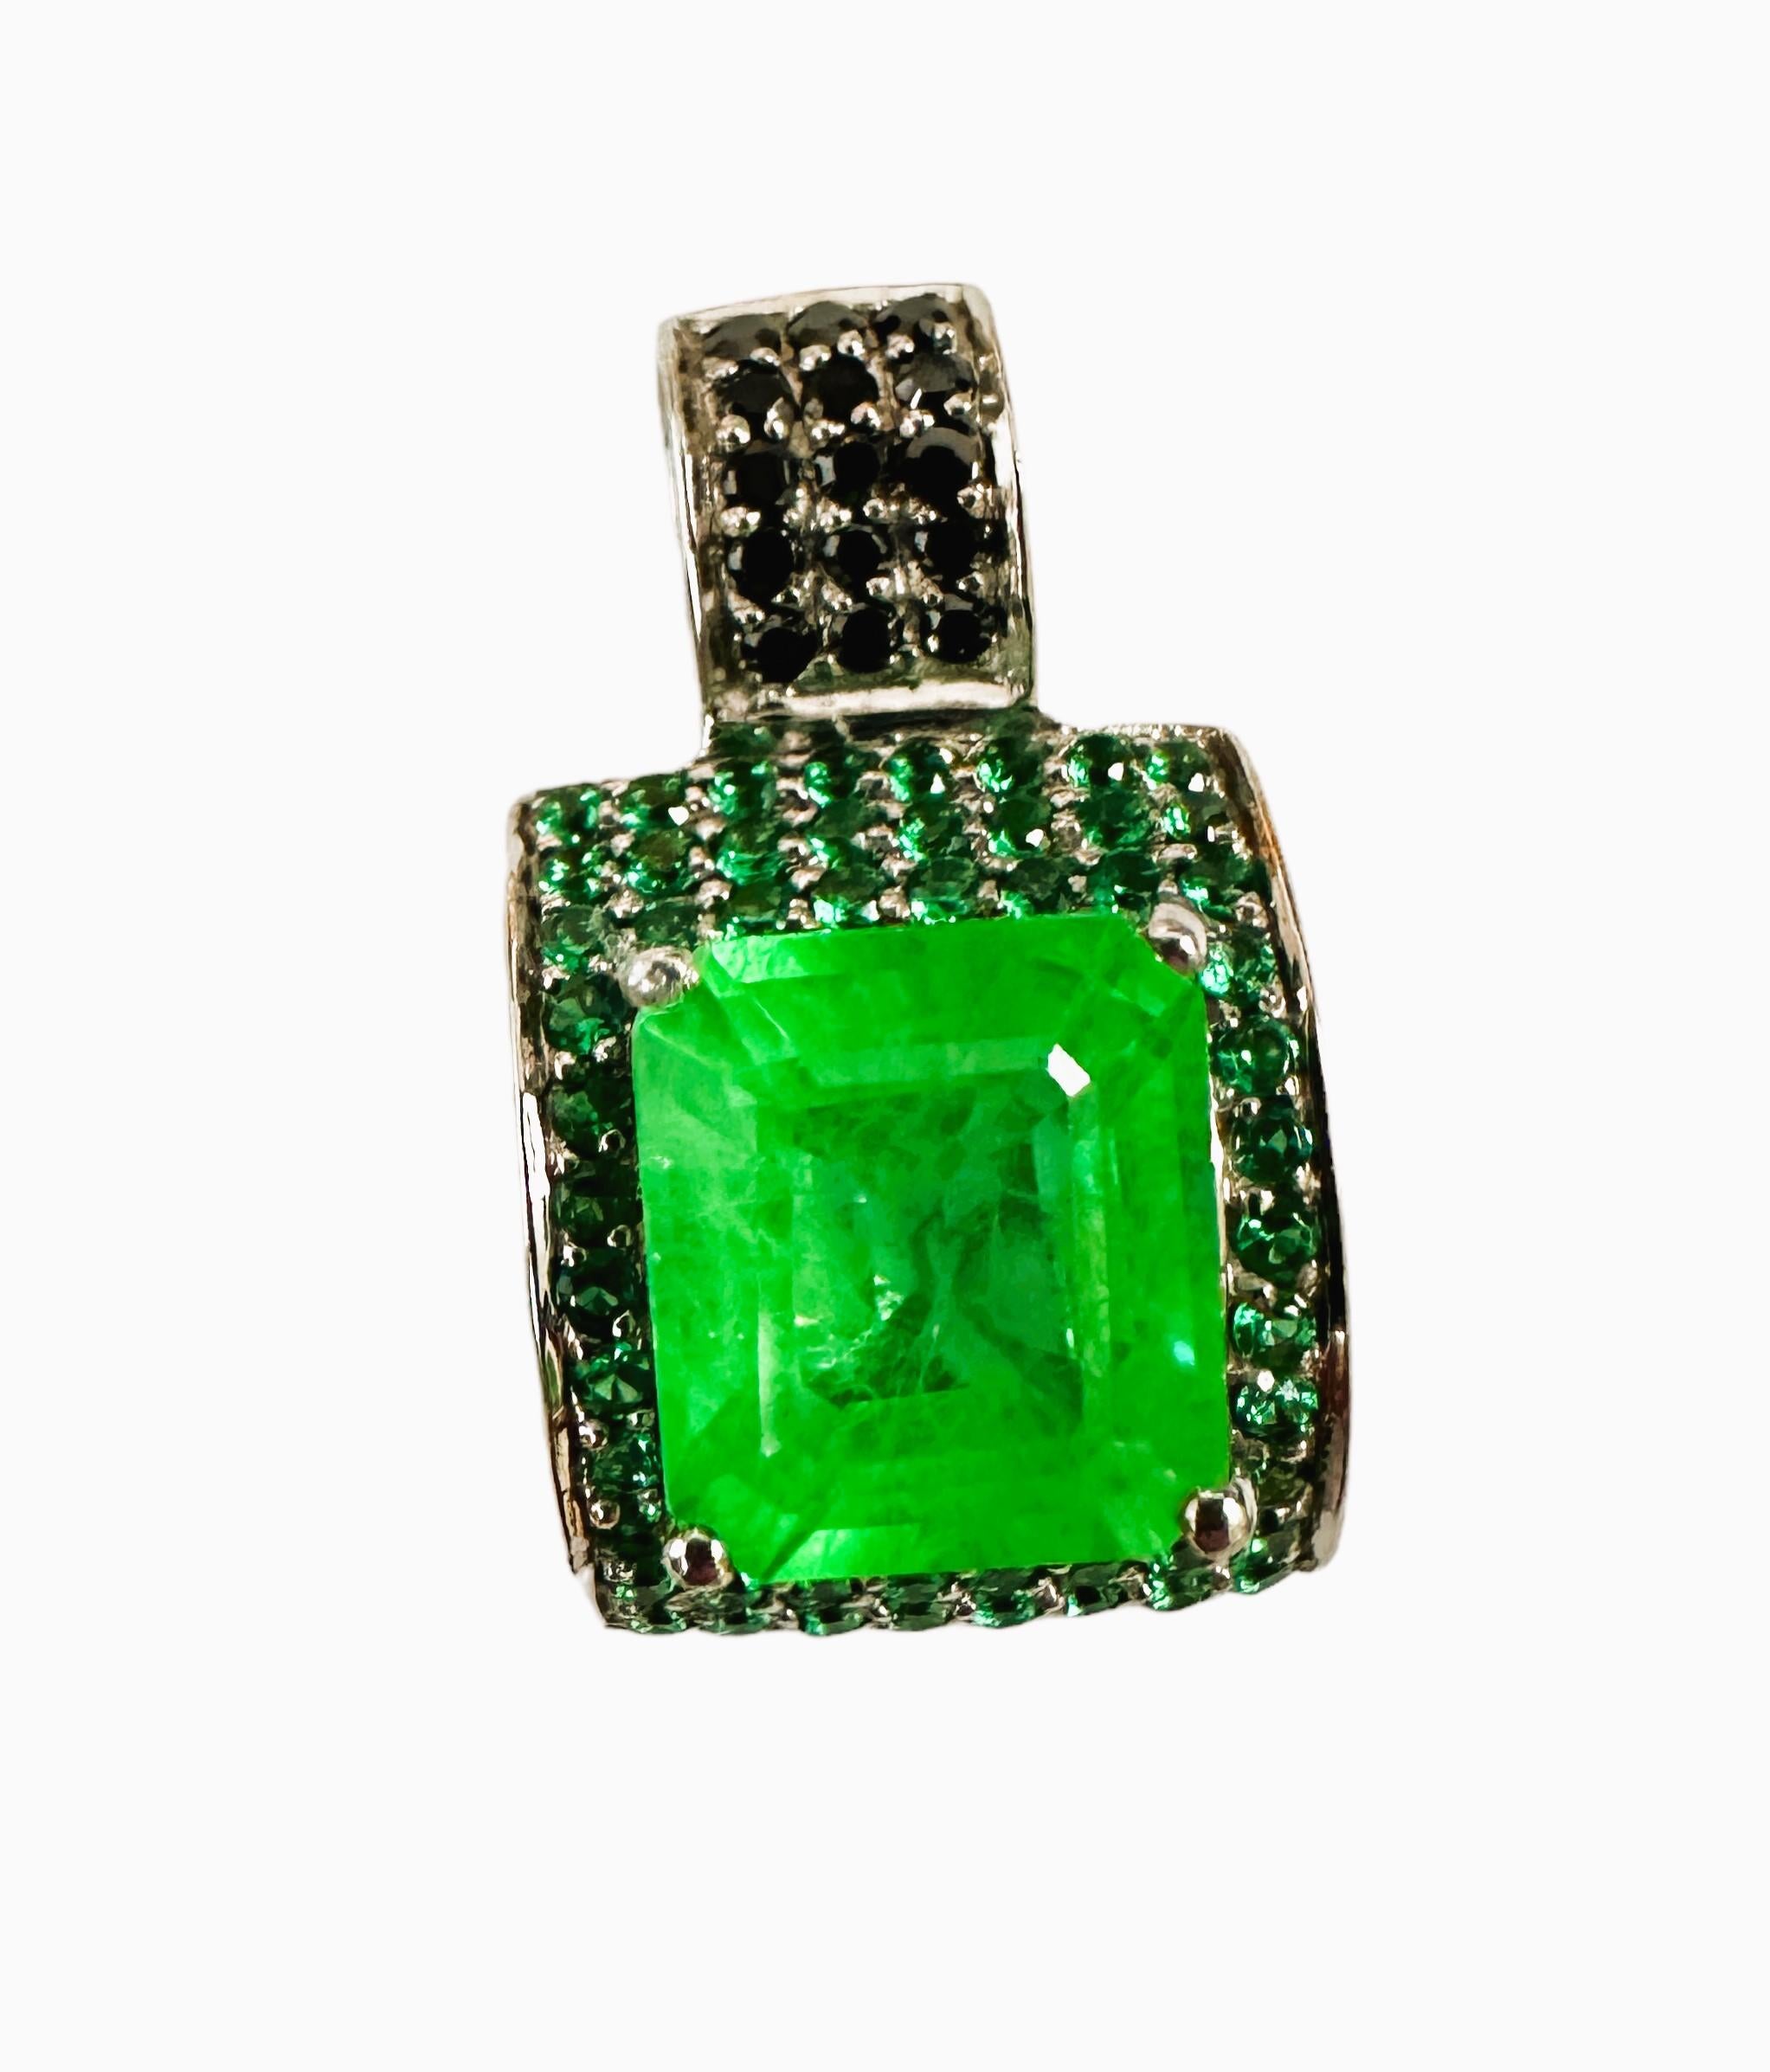 The is a beautiful pendant with an 8 ct Green Garnet Sapphire that is 8 carats and measures 11.3 mm.  It is surrounded by diamond cut Green Tsavorite stones and the bail has diamond cut black spinel stones.  It measures  1 inch long and .68 inches